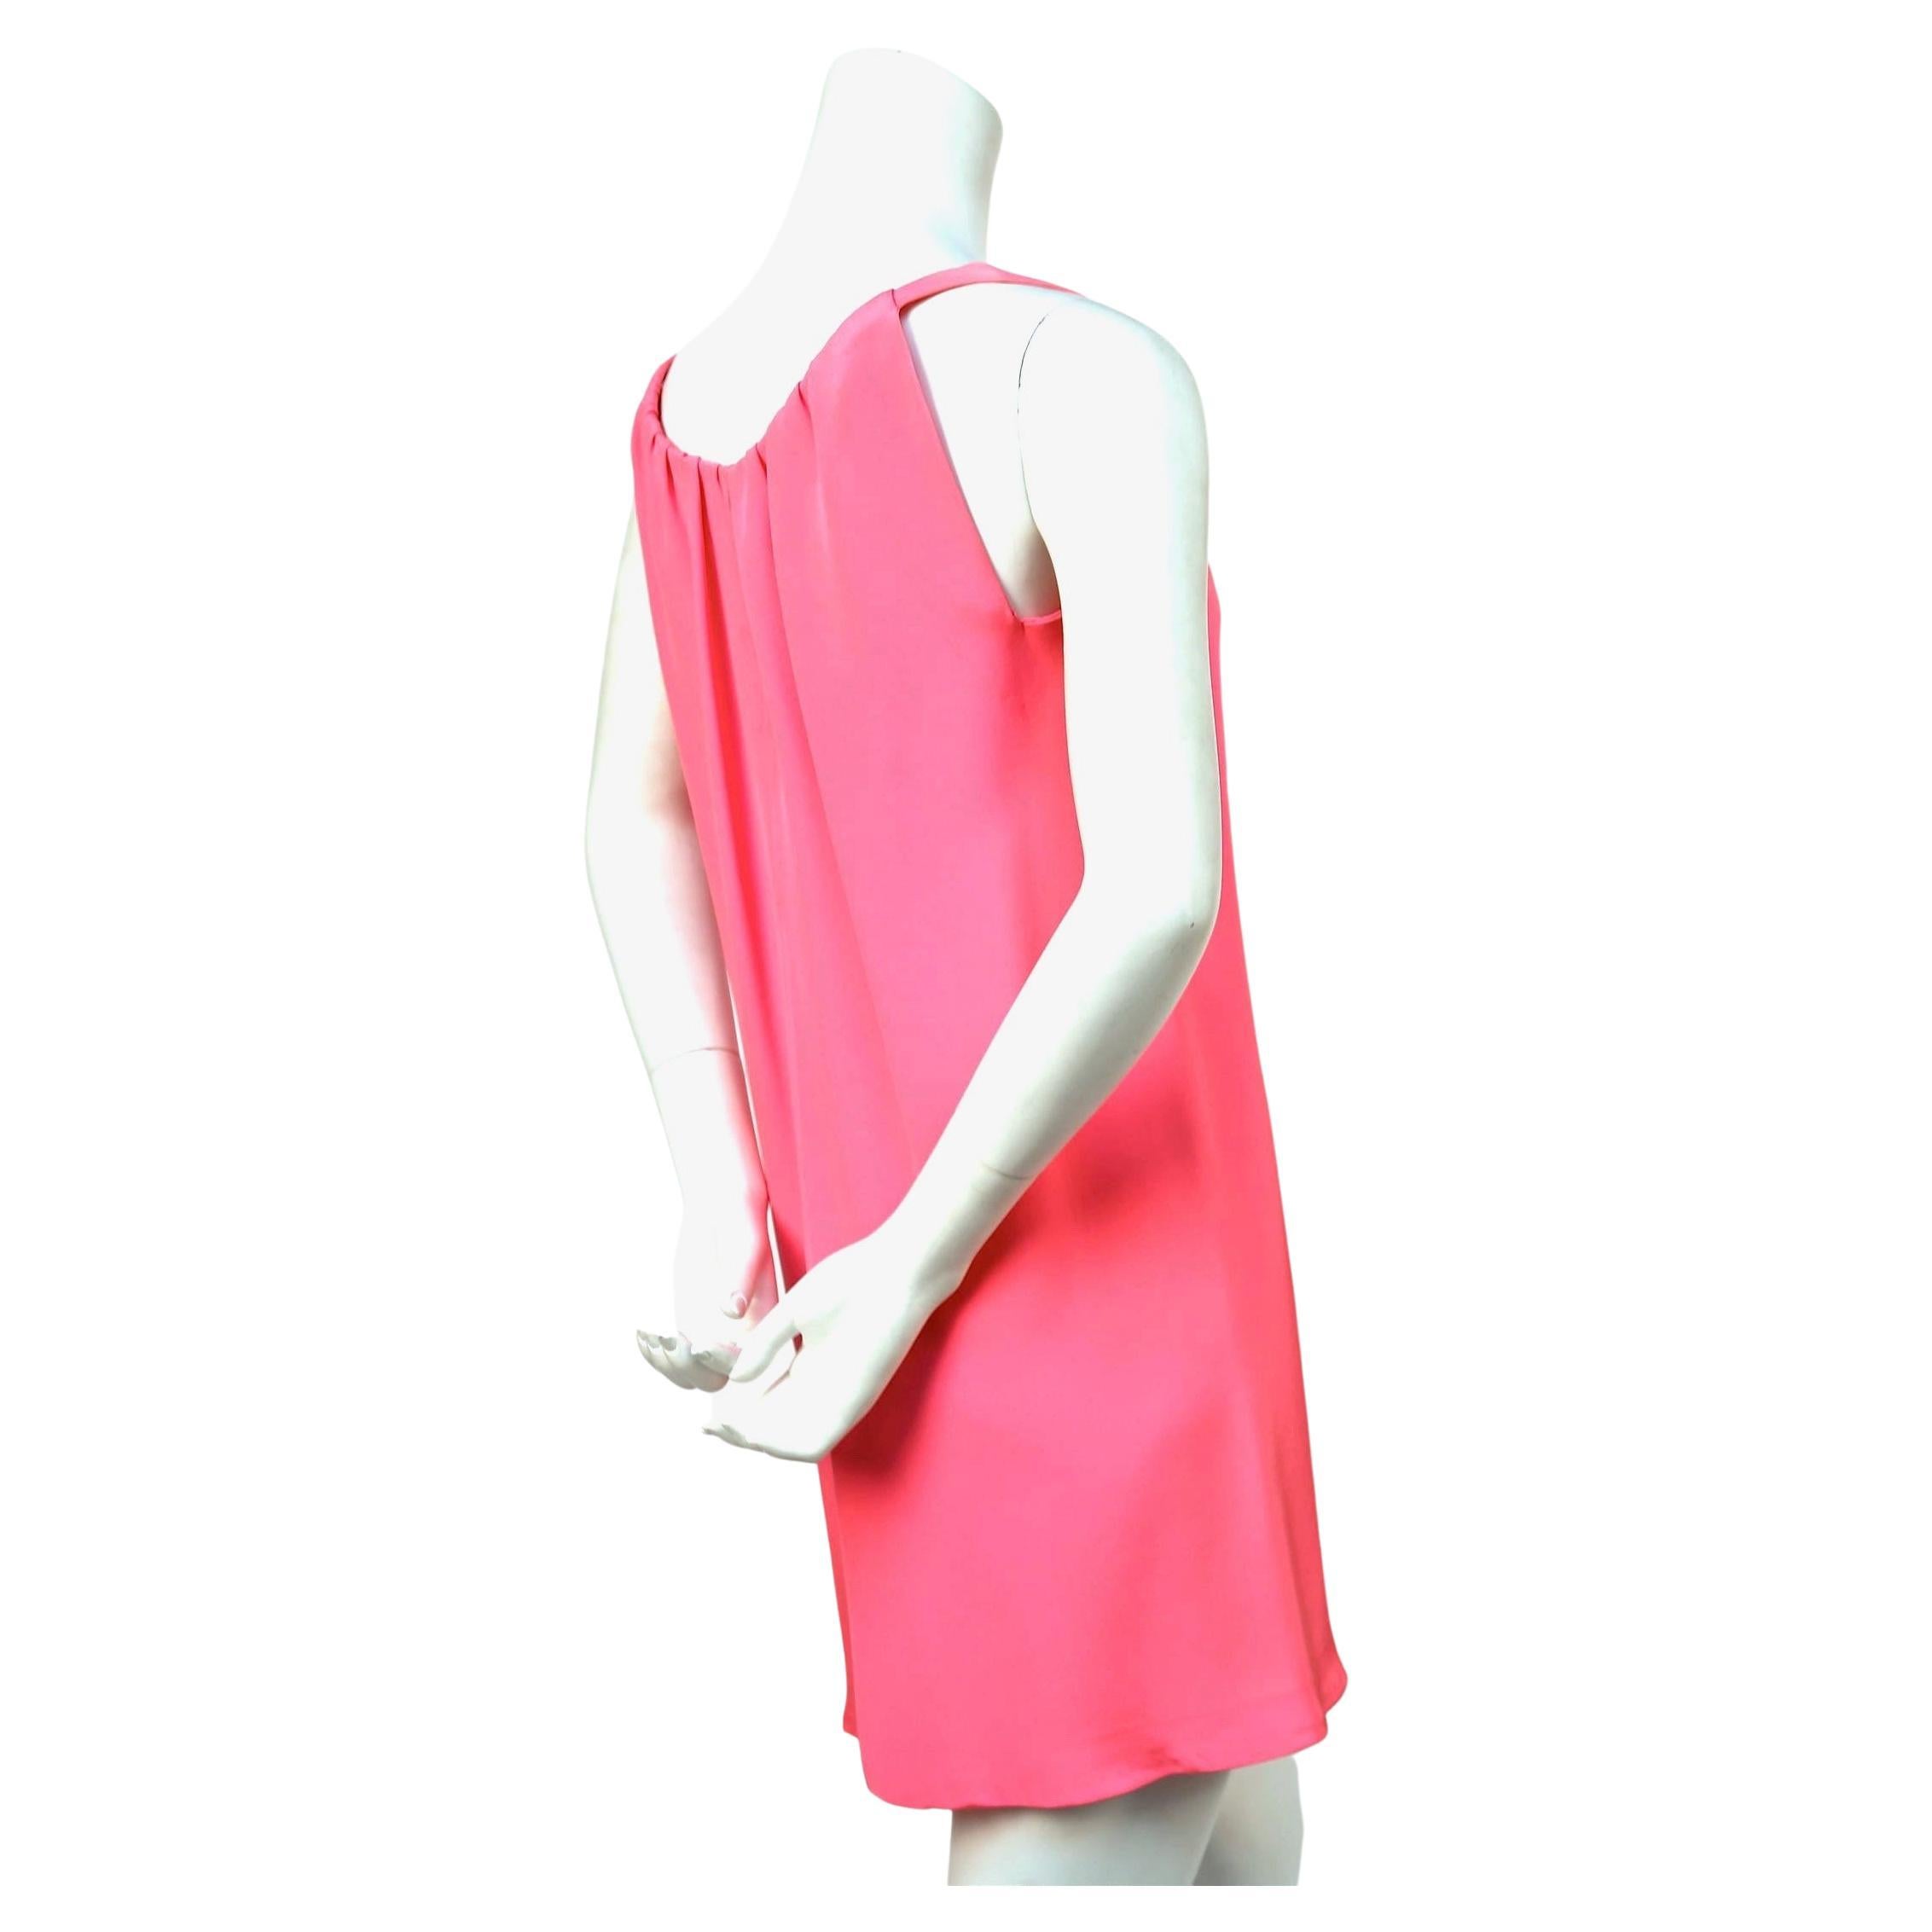 Very rare, vivid fuchsia, silk mini dress by Cristobal Balenciaga for Eisa dating to the 1960's. Fits a size 4 or 6. Approximate measurements: bust 36